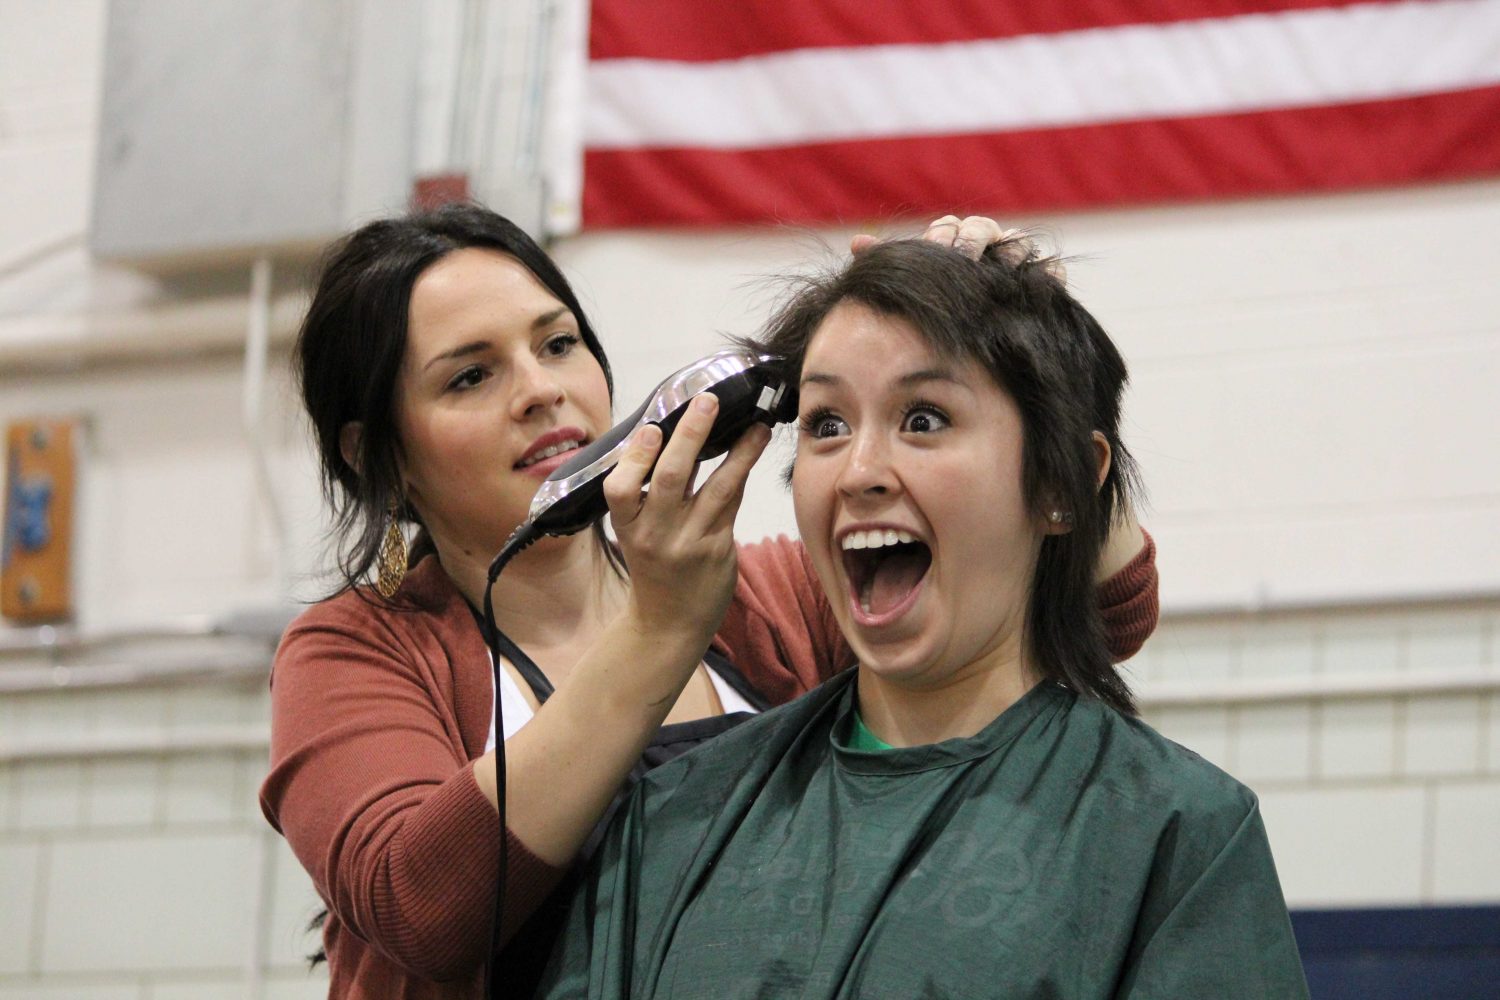 Sophomore Nathalie Solorio getting her hair buzzed off at the St. Baldricks event for childhood cancer research